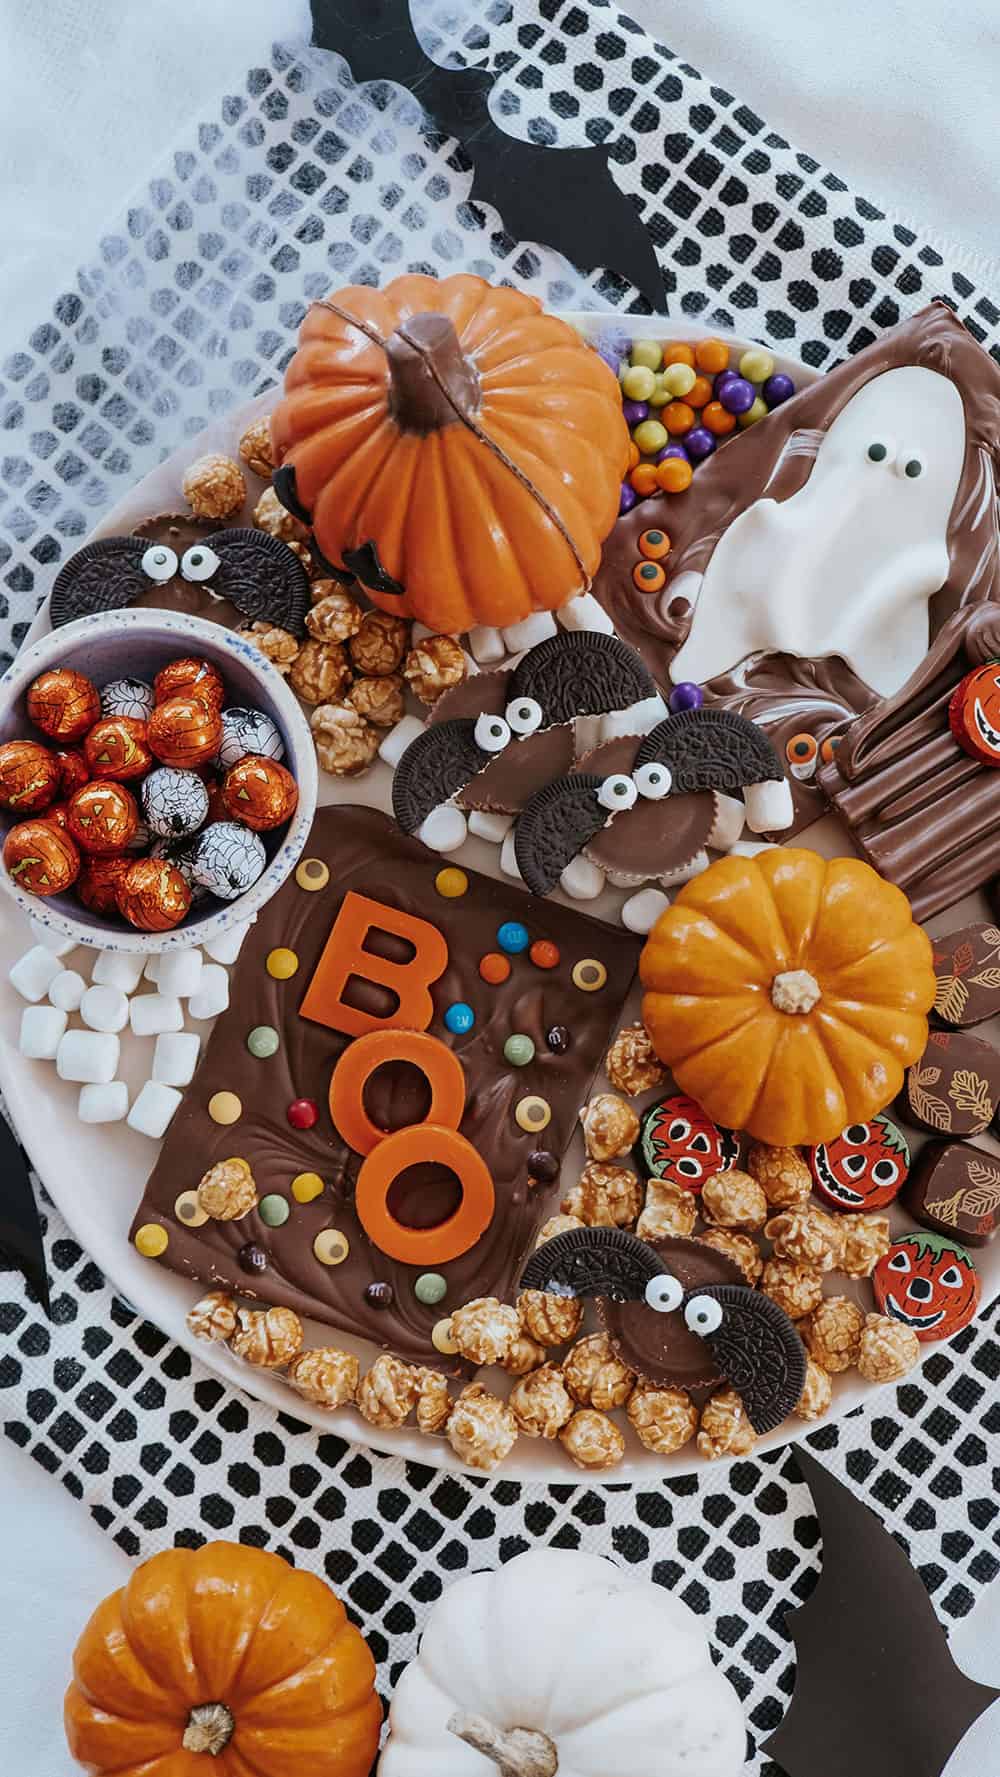 3 Tips For Making a Halloween Treat Board